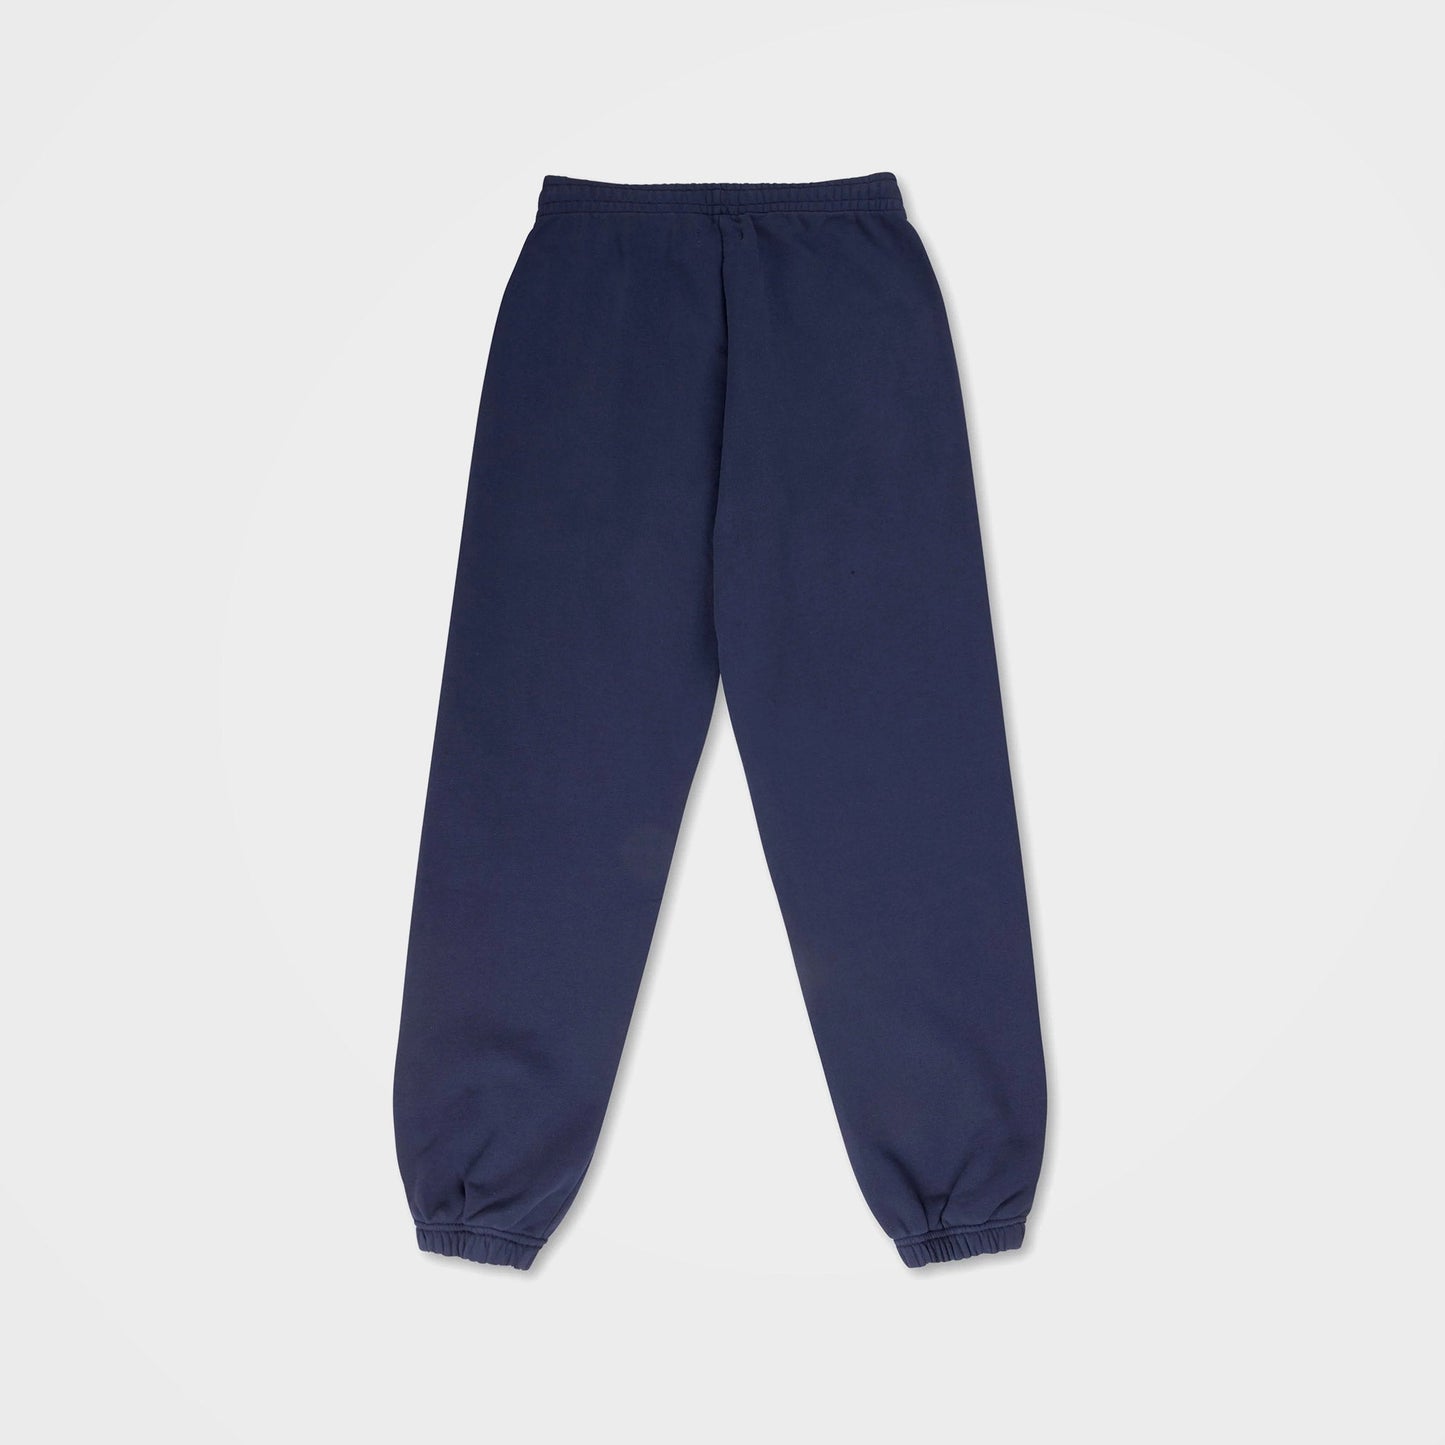 Navy Organic Cotton Sweatpants by 7Days Active